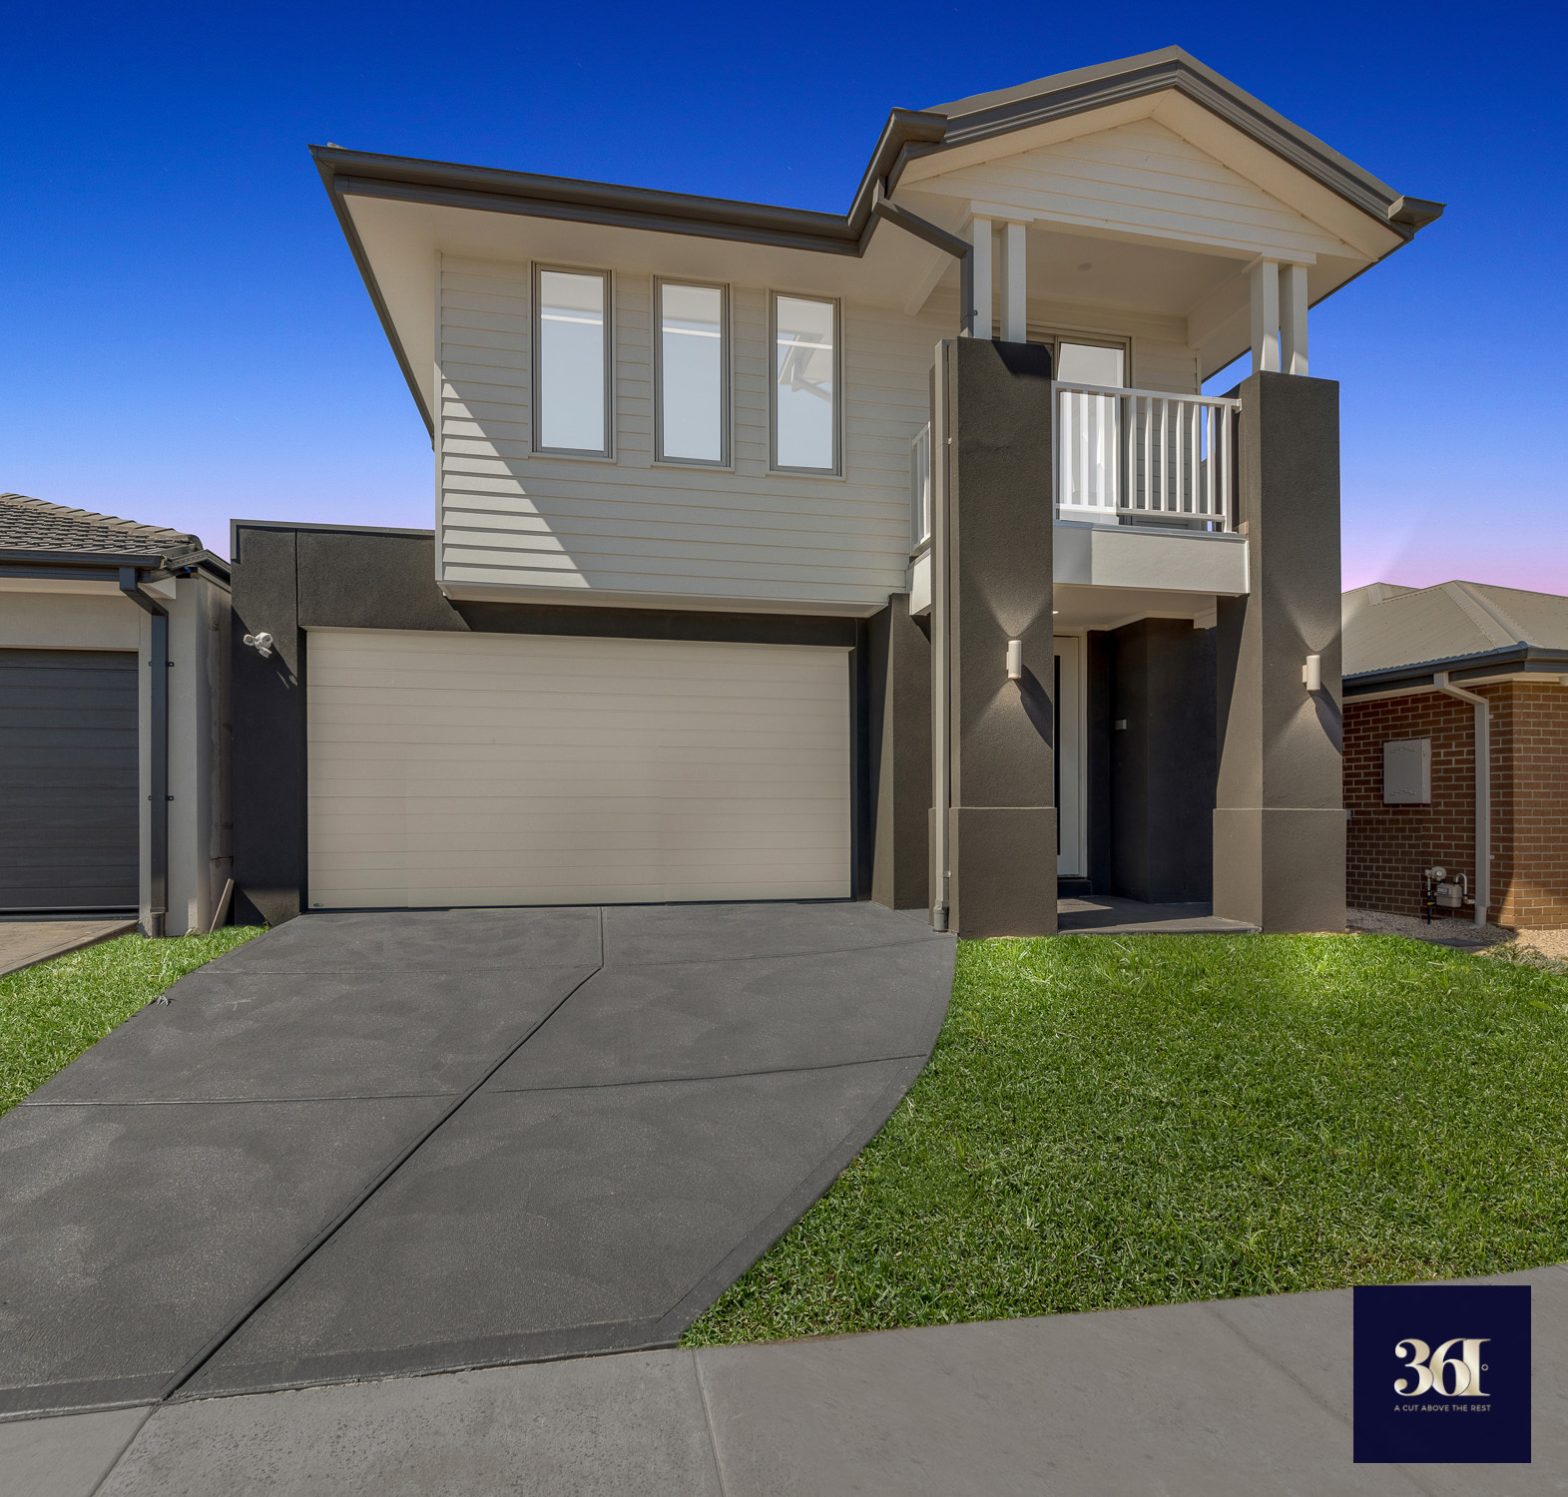 BRAND NEW DOUBLE STOREY SPACIOUS 4 BEDROOM HOME FOR RENT CLOSE TO BACCHUS MARSH GRAMMAR SCHOOL